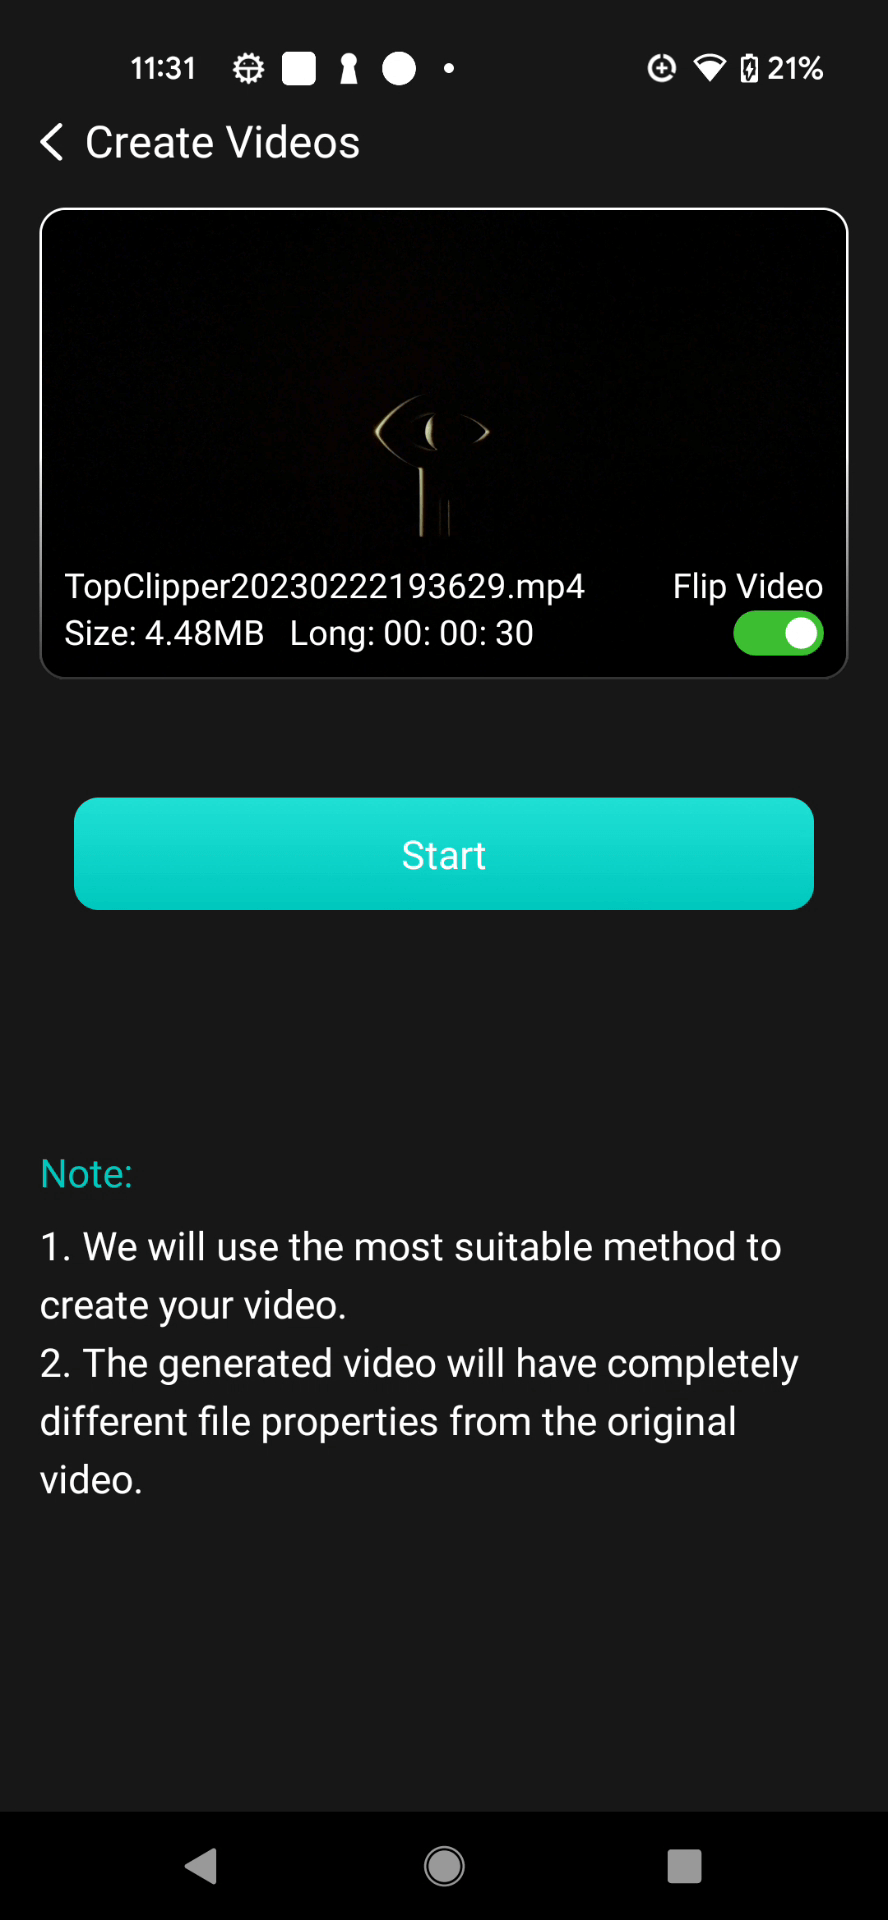 click start to create video